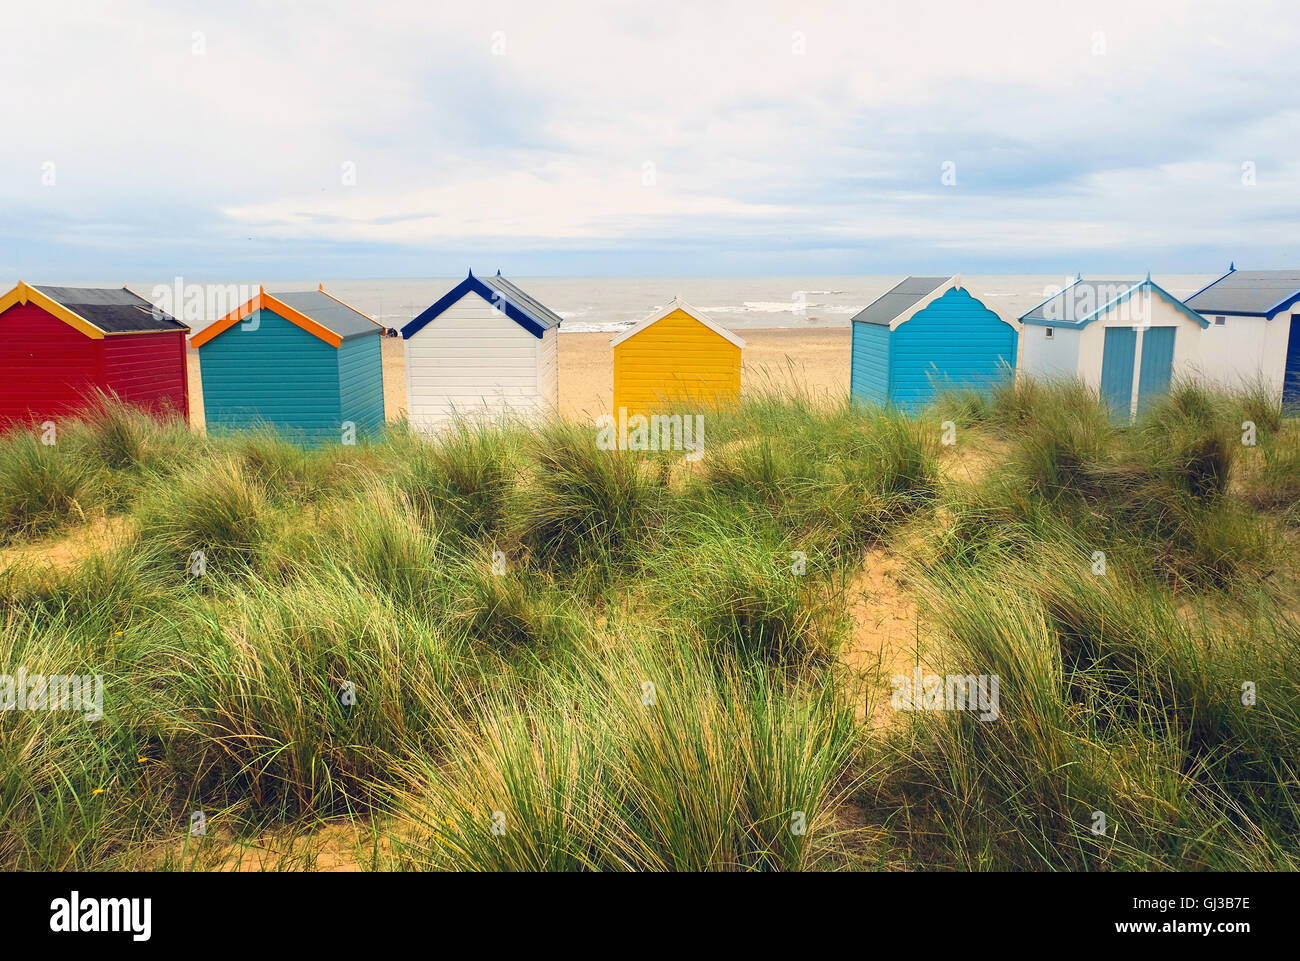 Rear view of a row multi-coloured beach huts in sand dunes, Southwold, Suffolk, UK Stock Photo